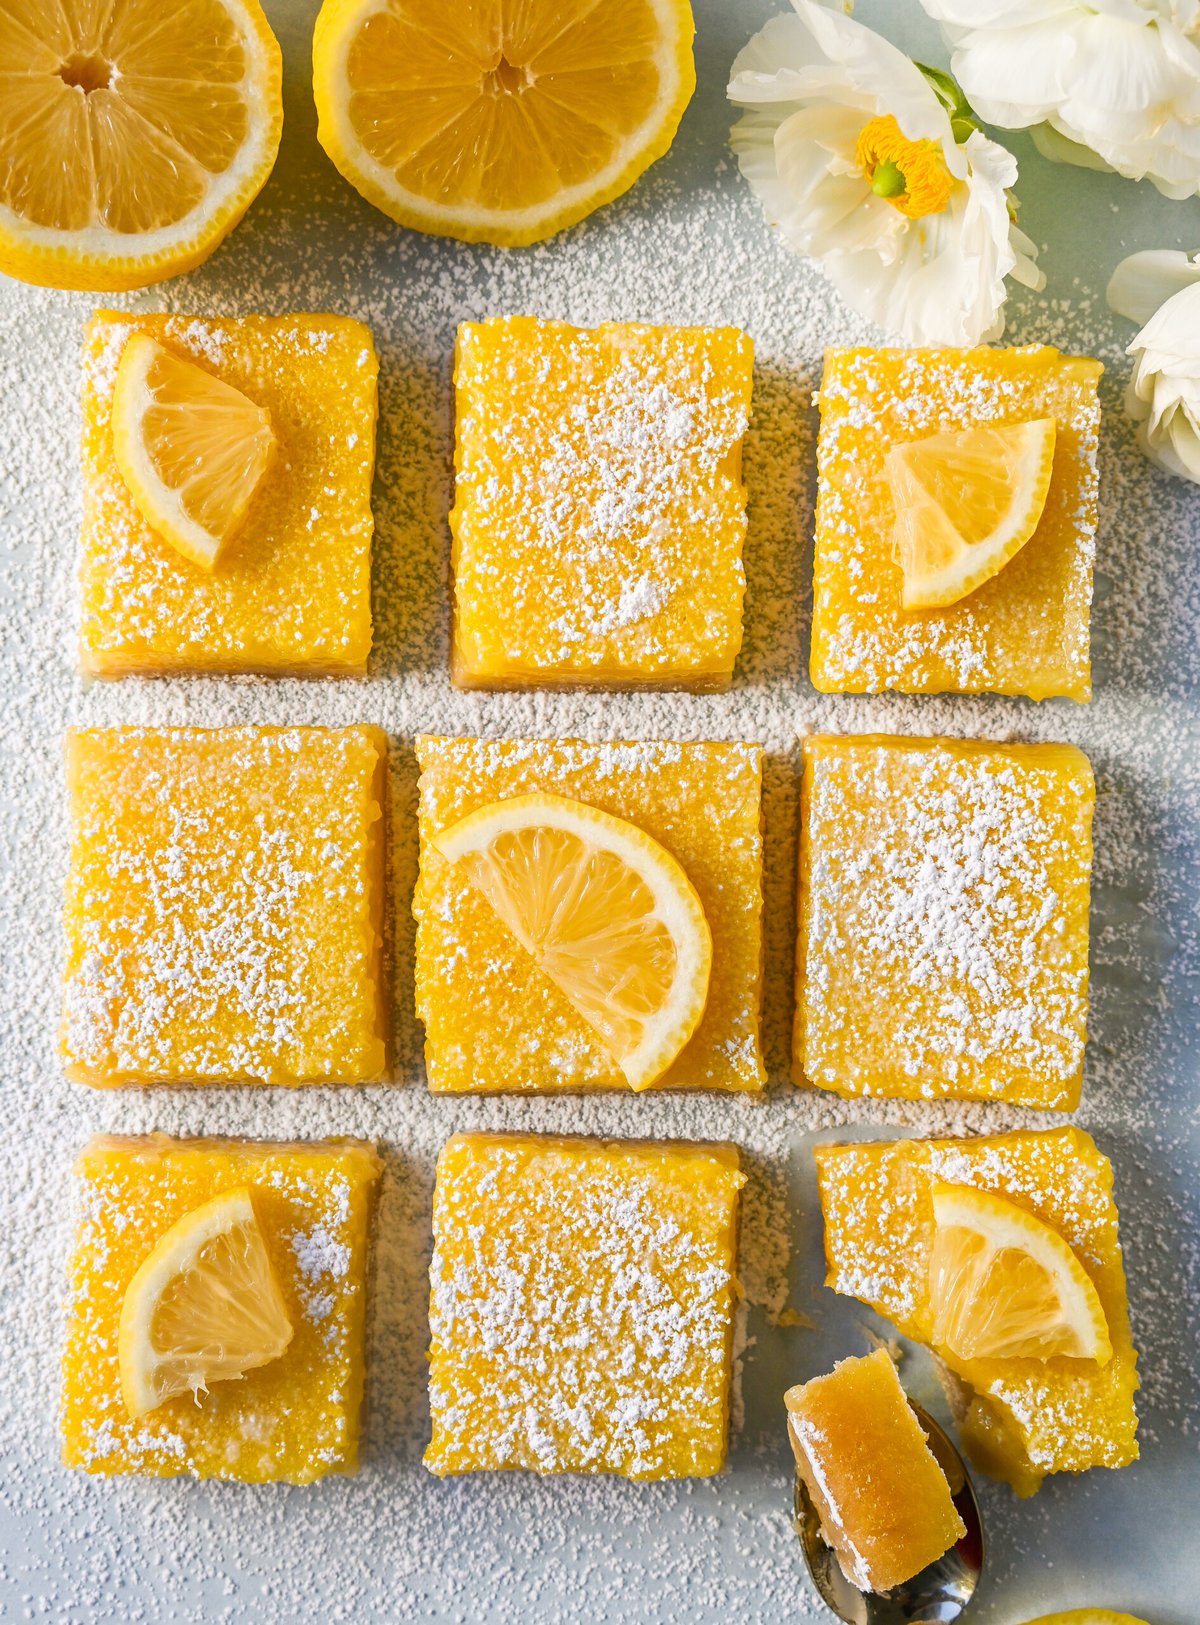 Lemon Bars. These classic lemon bars are made with tangy and sweet lemon curd and a buttery shortbread crust. If you love lemon desserts, you will love this lemon bar recipe. How to make the perfect lemon bar!